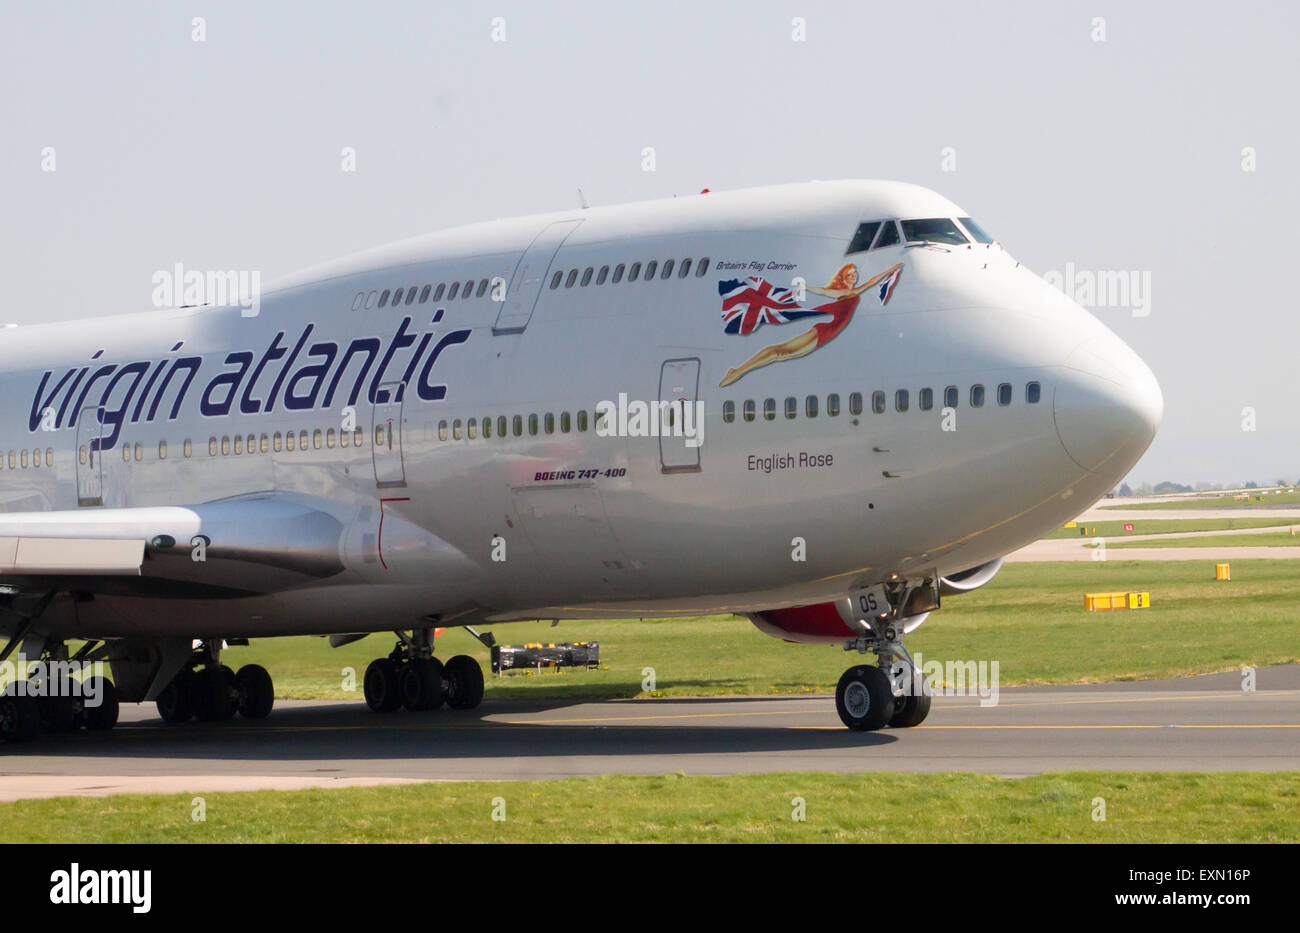 Virgin Atlantic Boeing 747-400 'English Rose' taxiing on Manchester Airport taxiway. Stock Photo